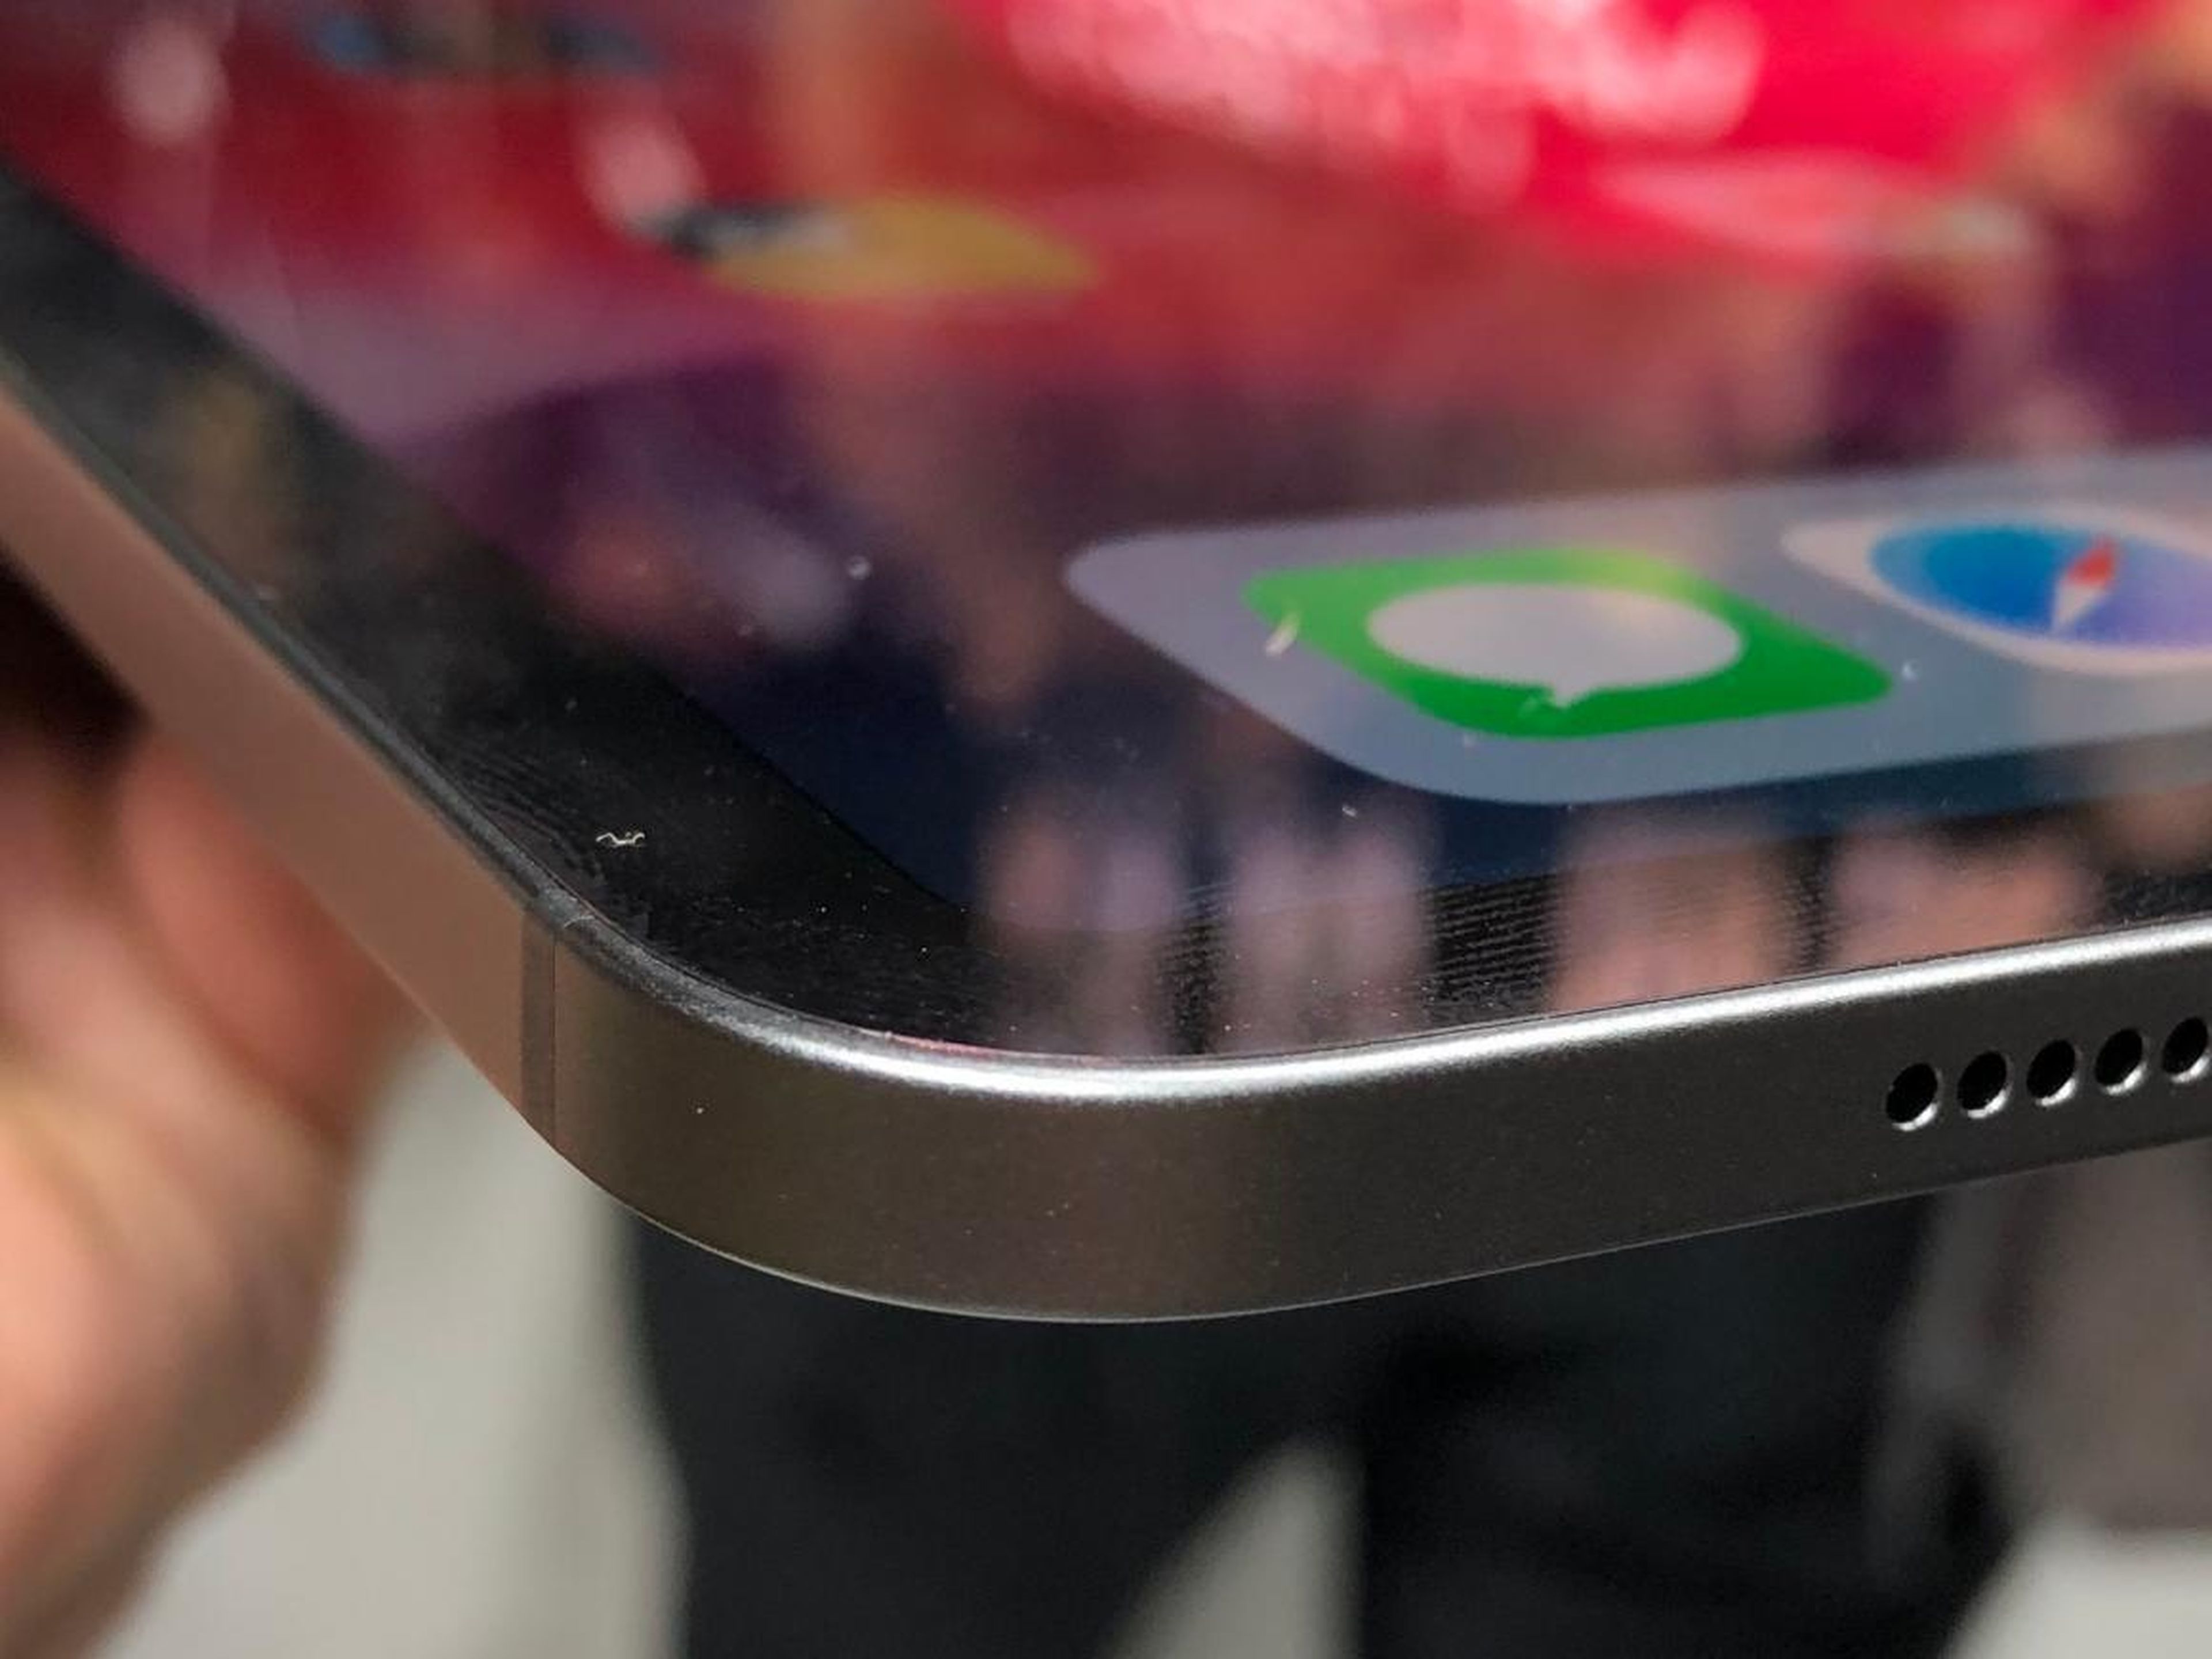 One big change is that the edges aren't tapered anymore. Instead, they're squared off, like the iPhone 5, making it feel a little bit more "professional."